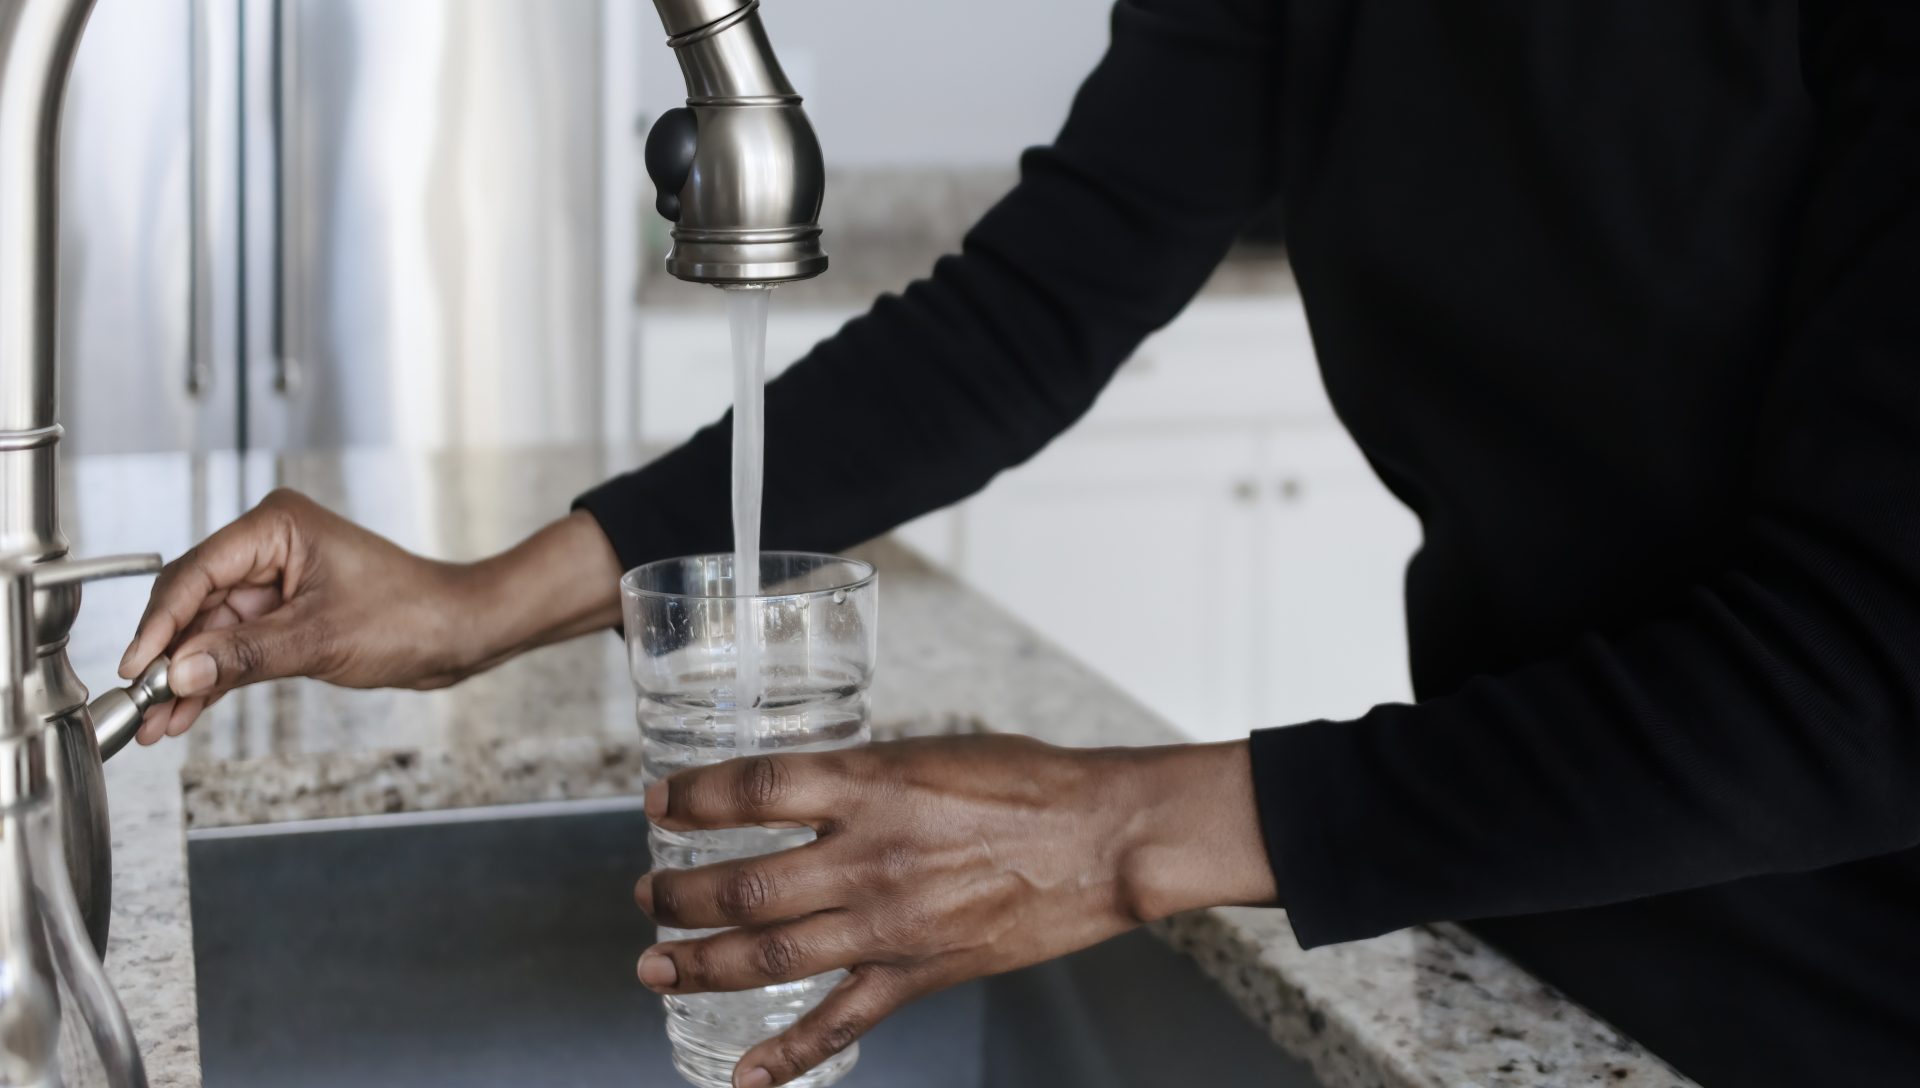 New study: Half the nation's tap water laced with a 'Forever Chemical